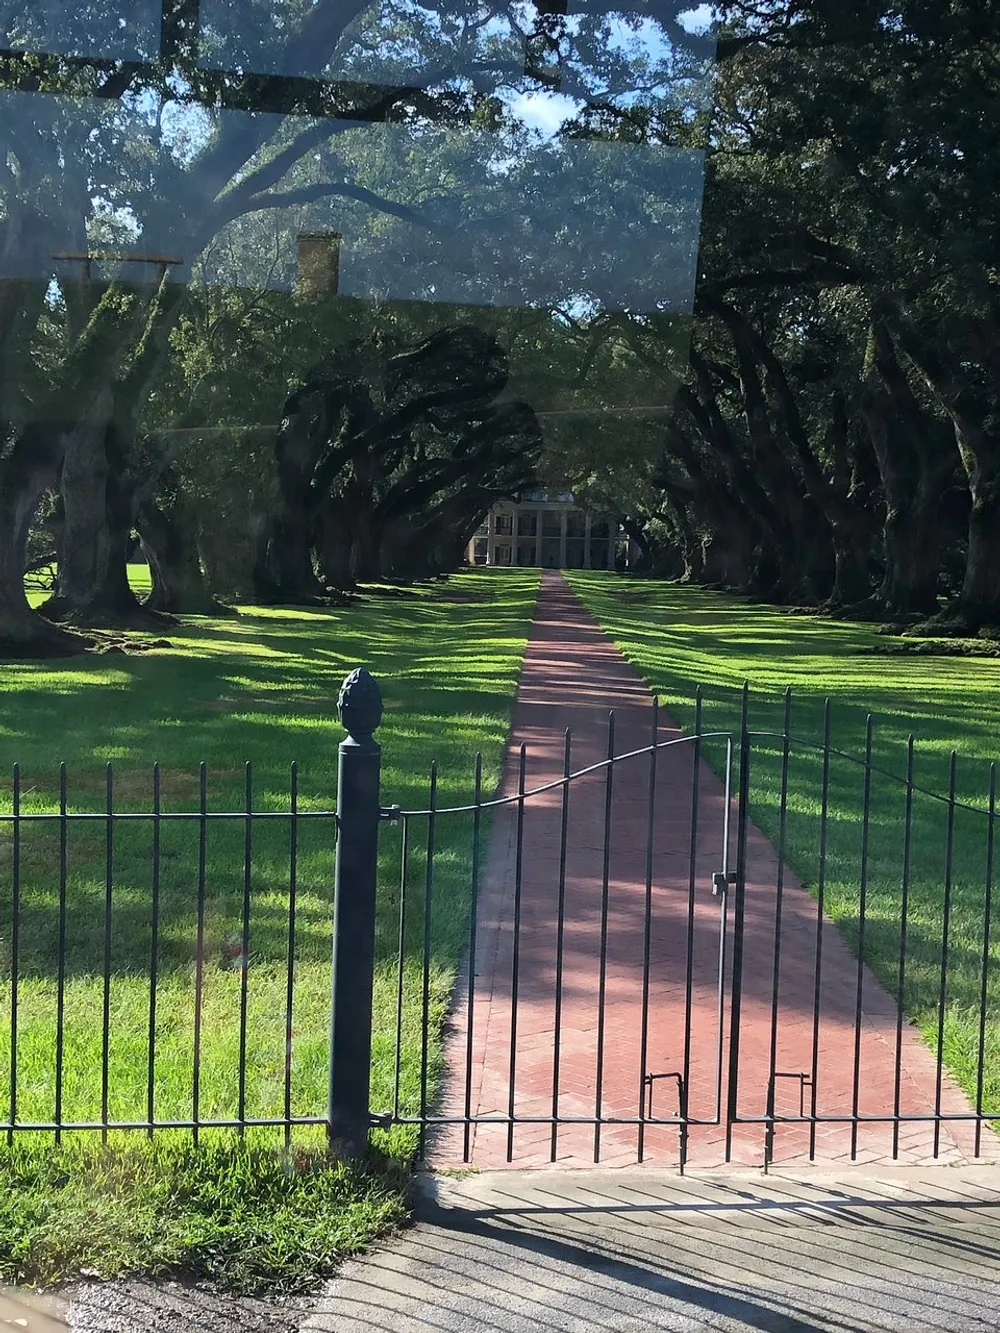 A red brick pathway leads through an alley of majestic oak trees towards a classical house viewed from behind a wrought-iron gate